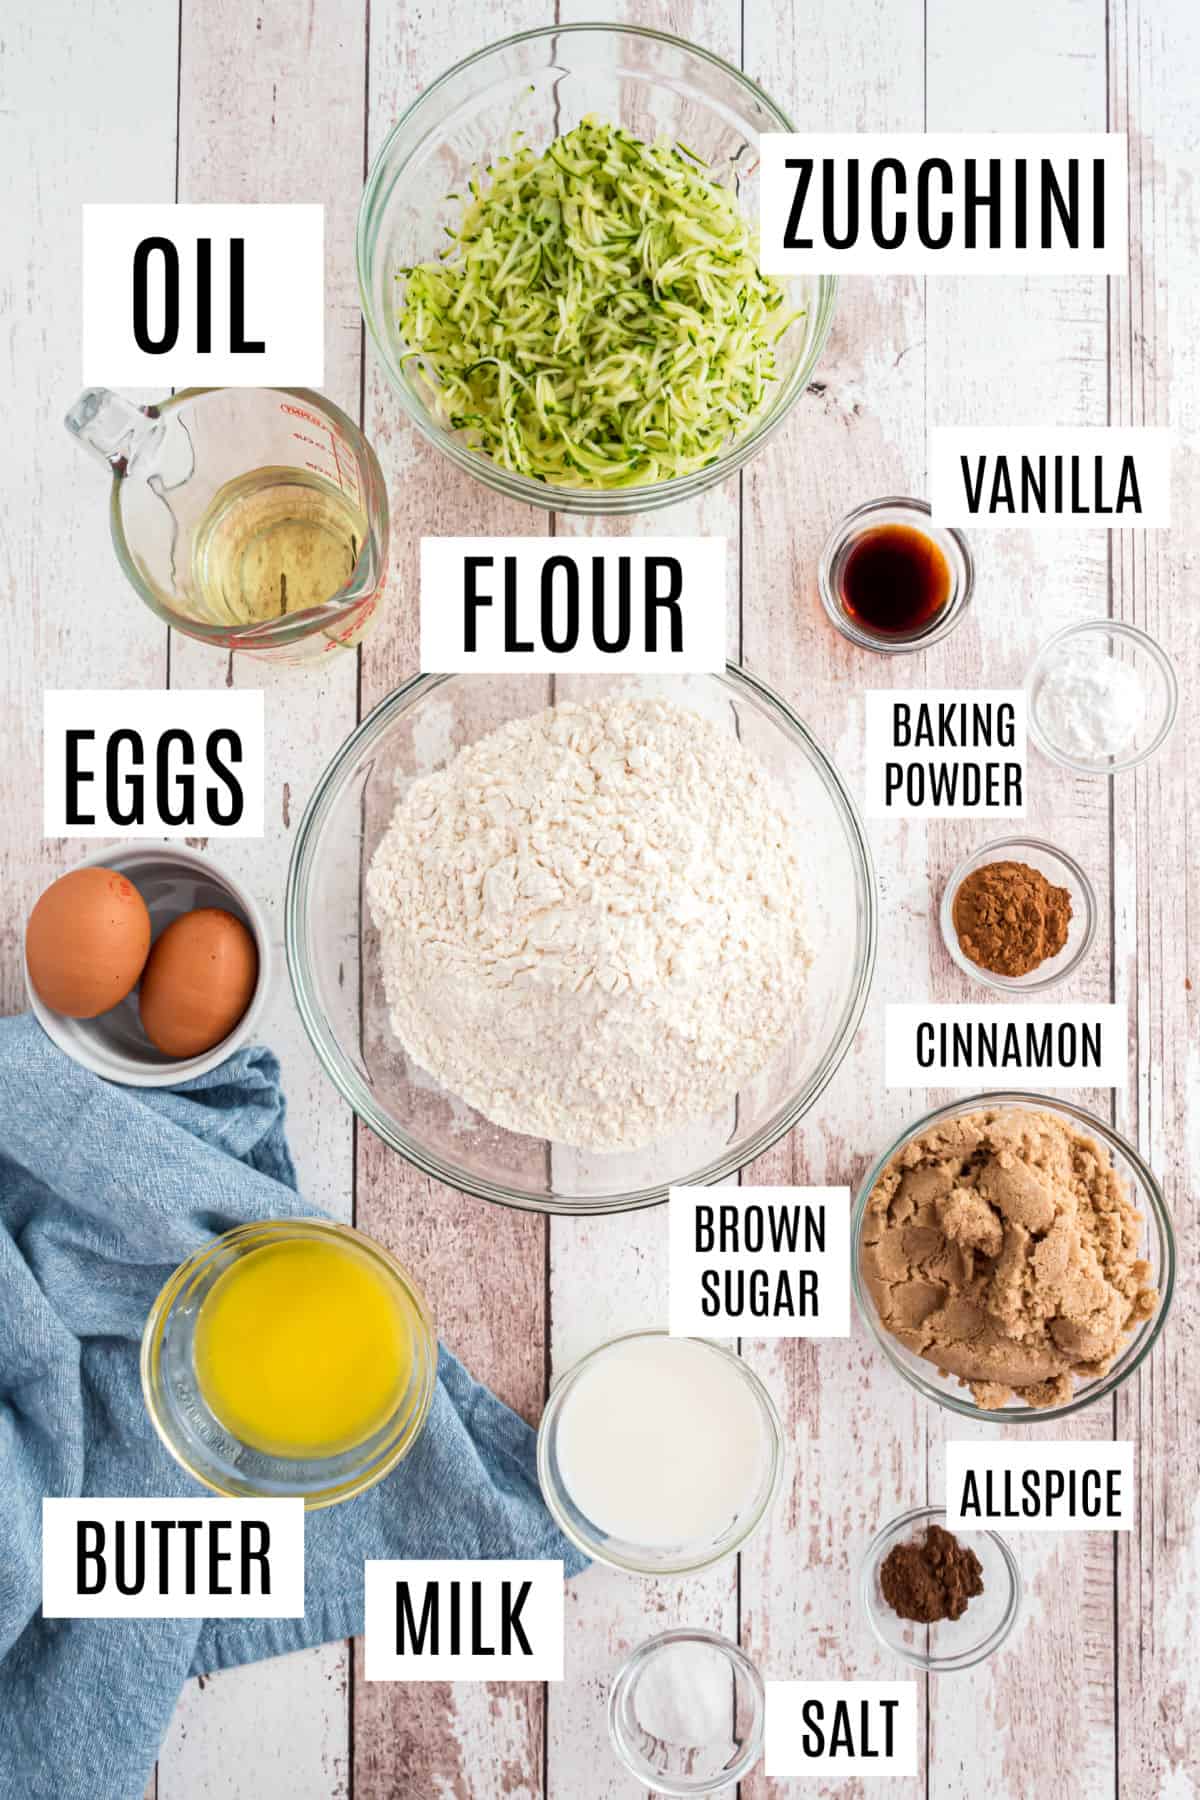 Ingredients needed to make zucchini bread.